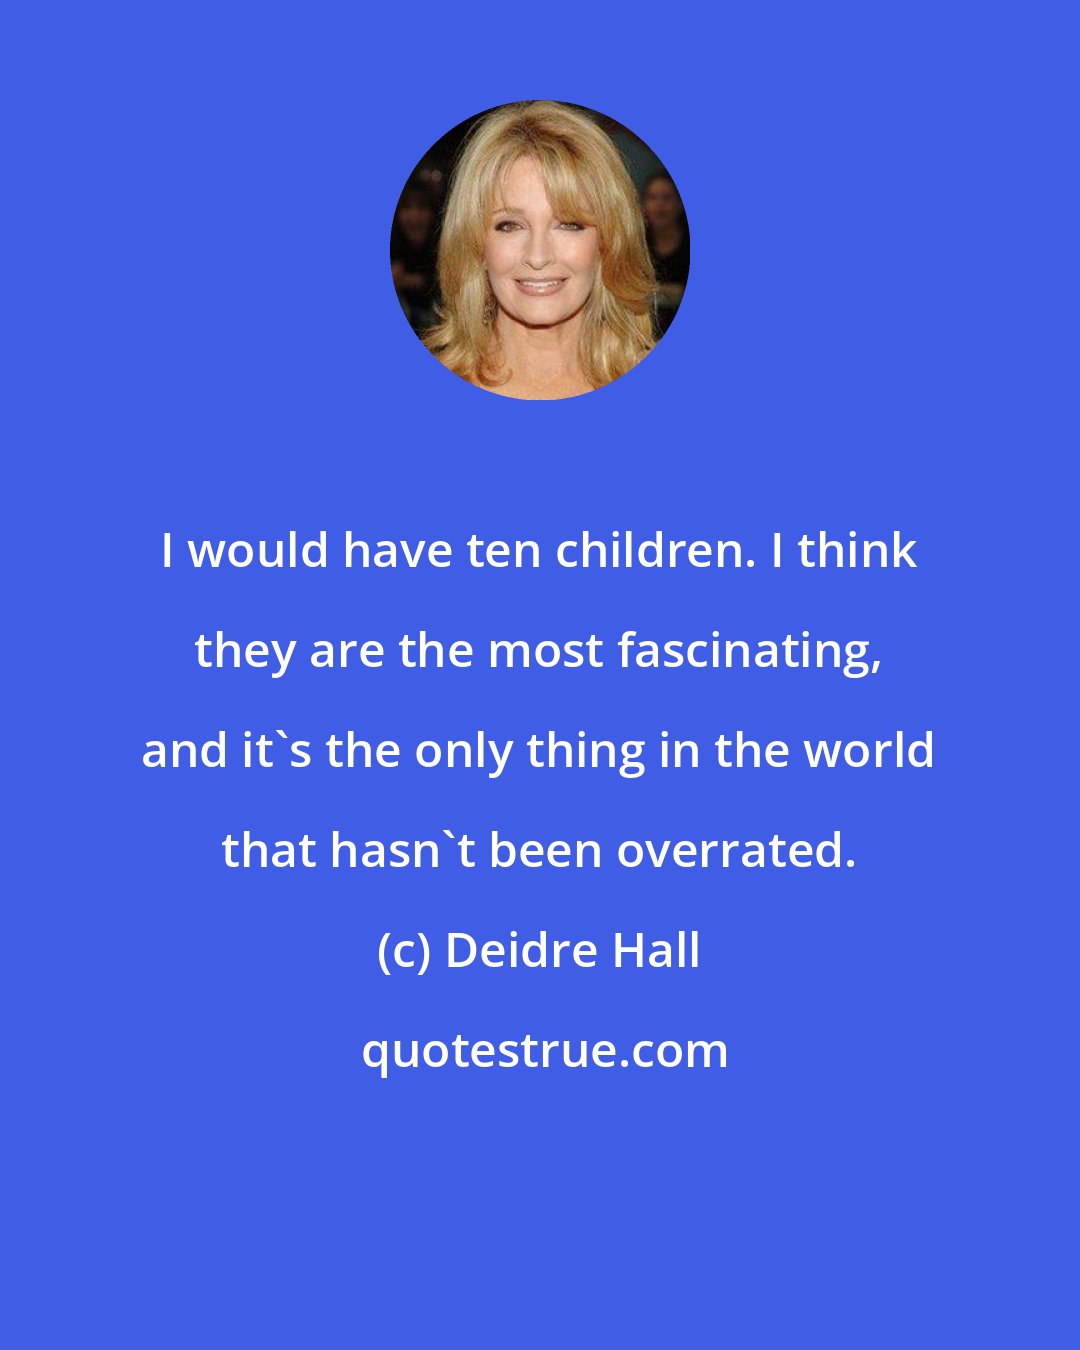 Deidre Hall: I would have ten children. I think they are the most fascinating, and it's the only thing in the world that hasn't been overrated.